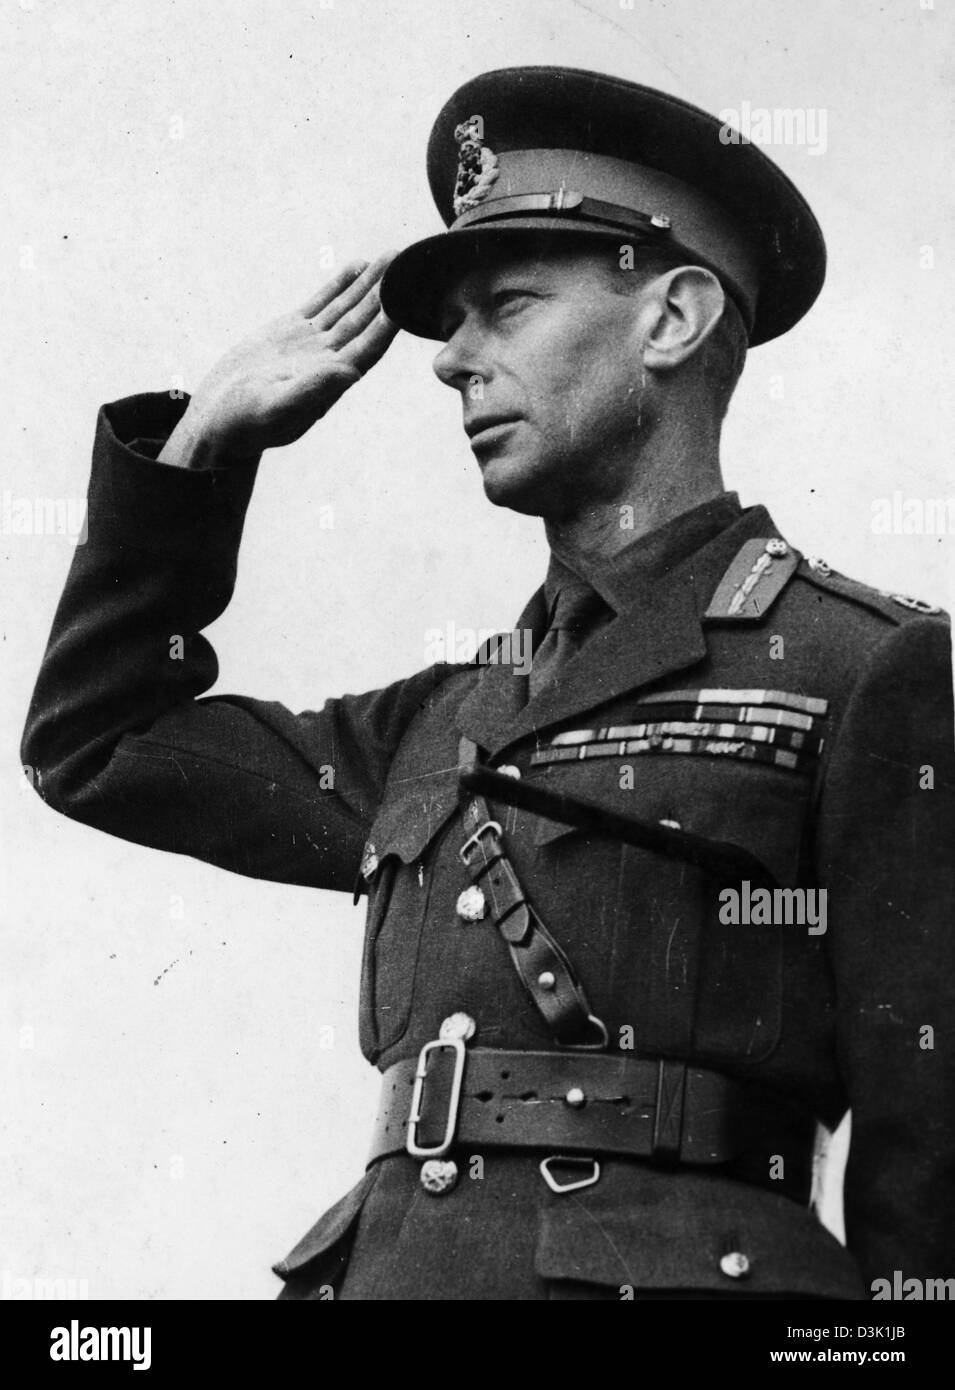 King George VI in army uniform during WW2 Stock Photo